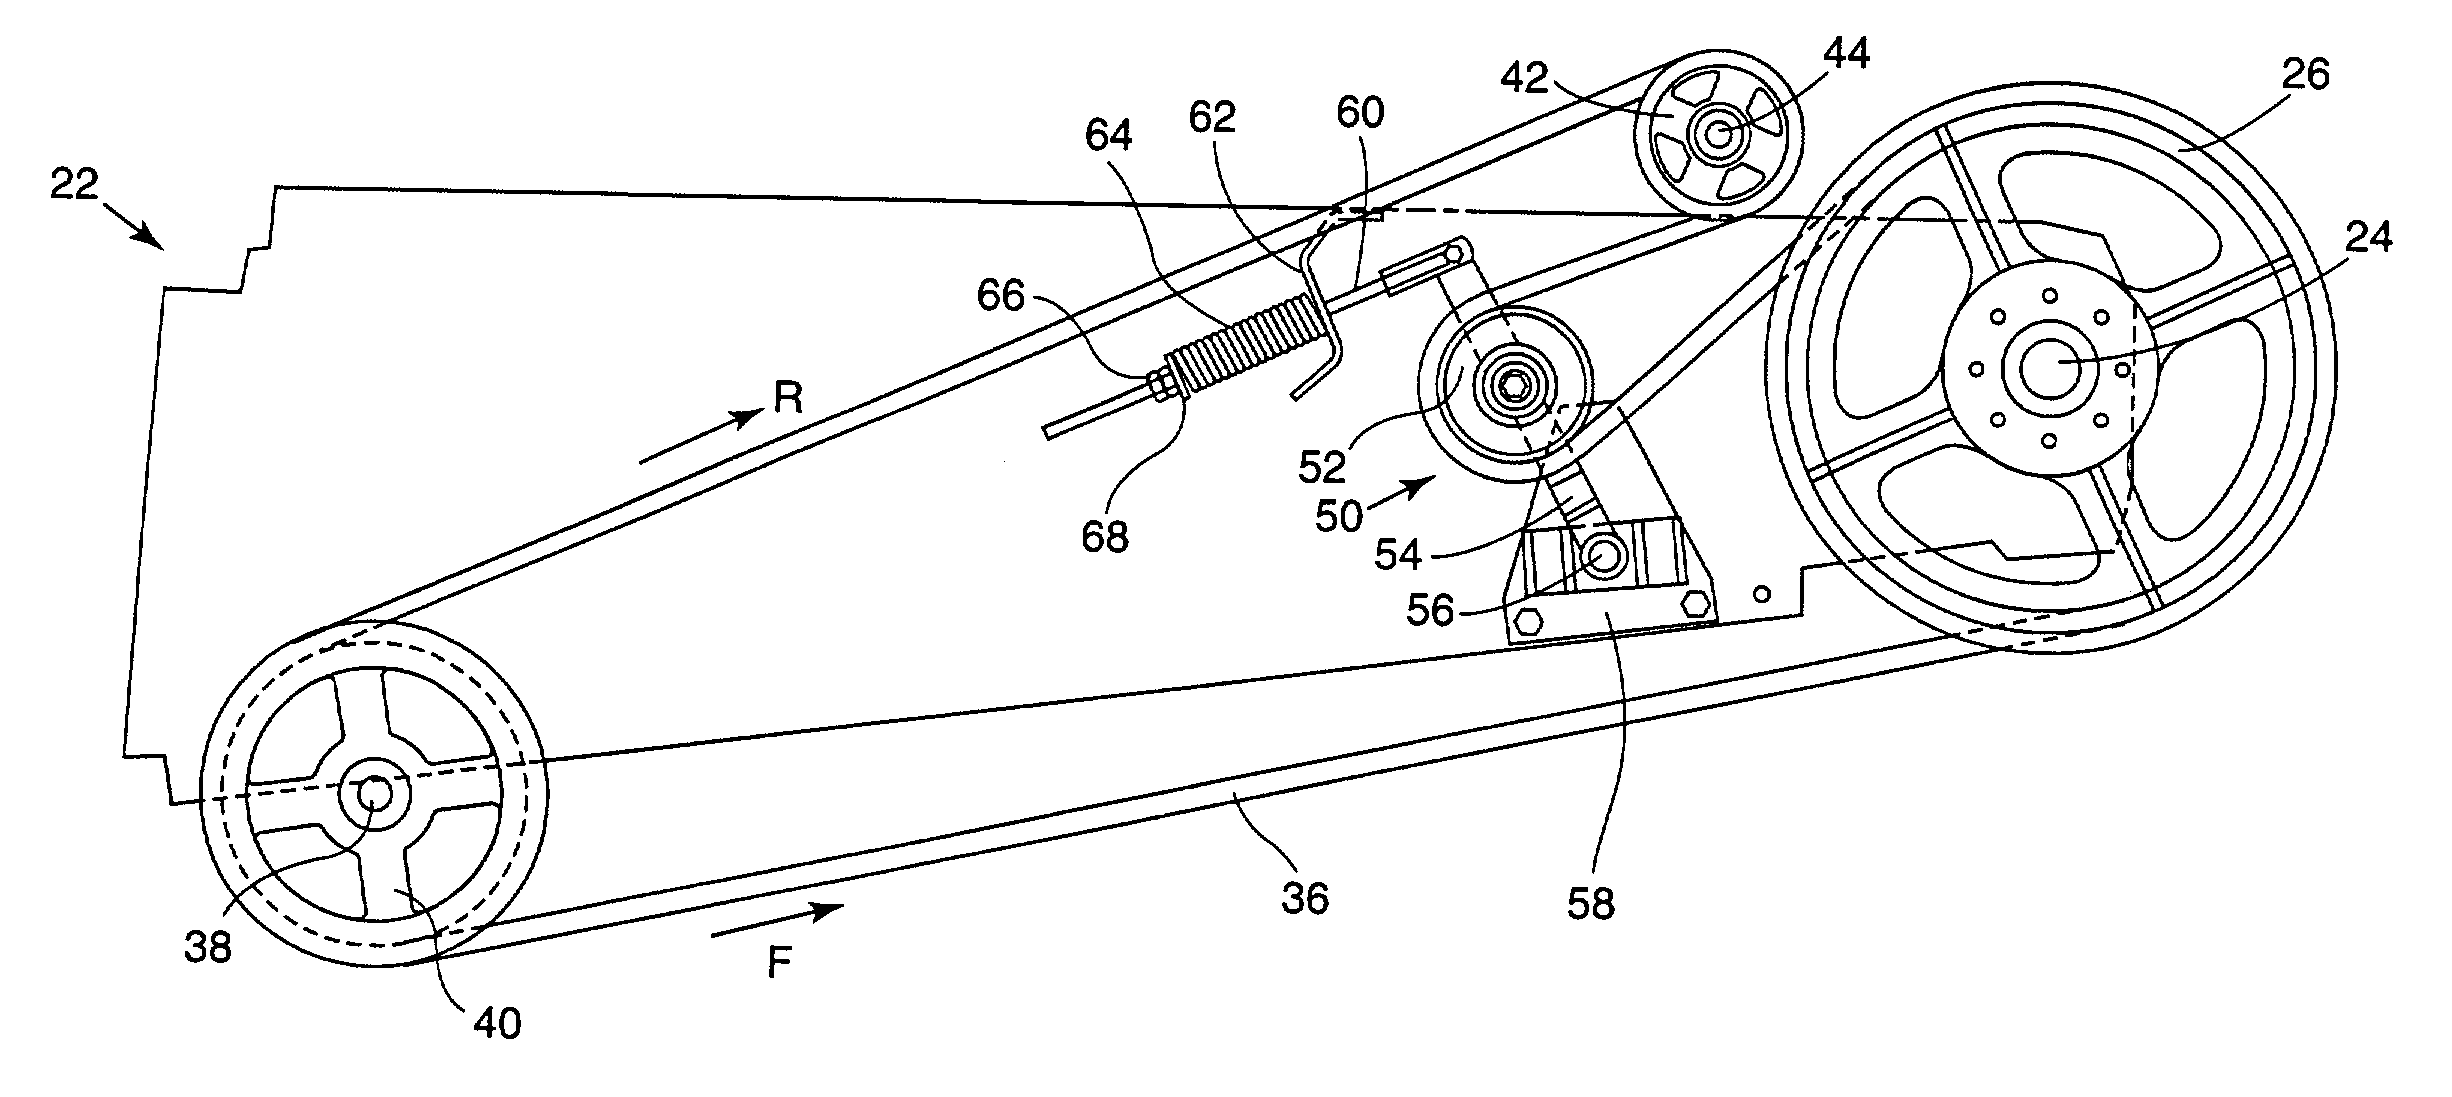 Utility machinery and associated reversible feeder mechanisms